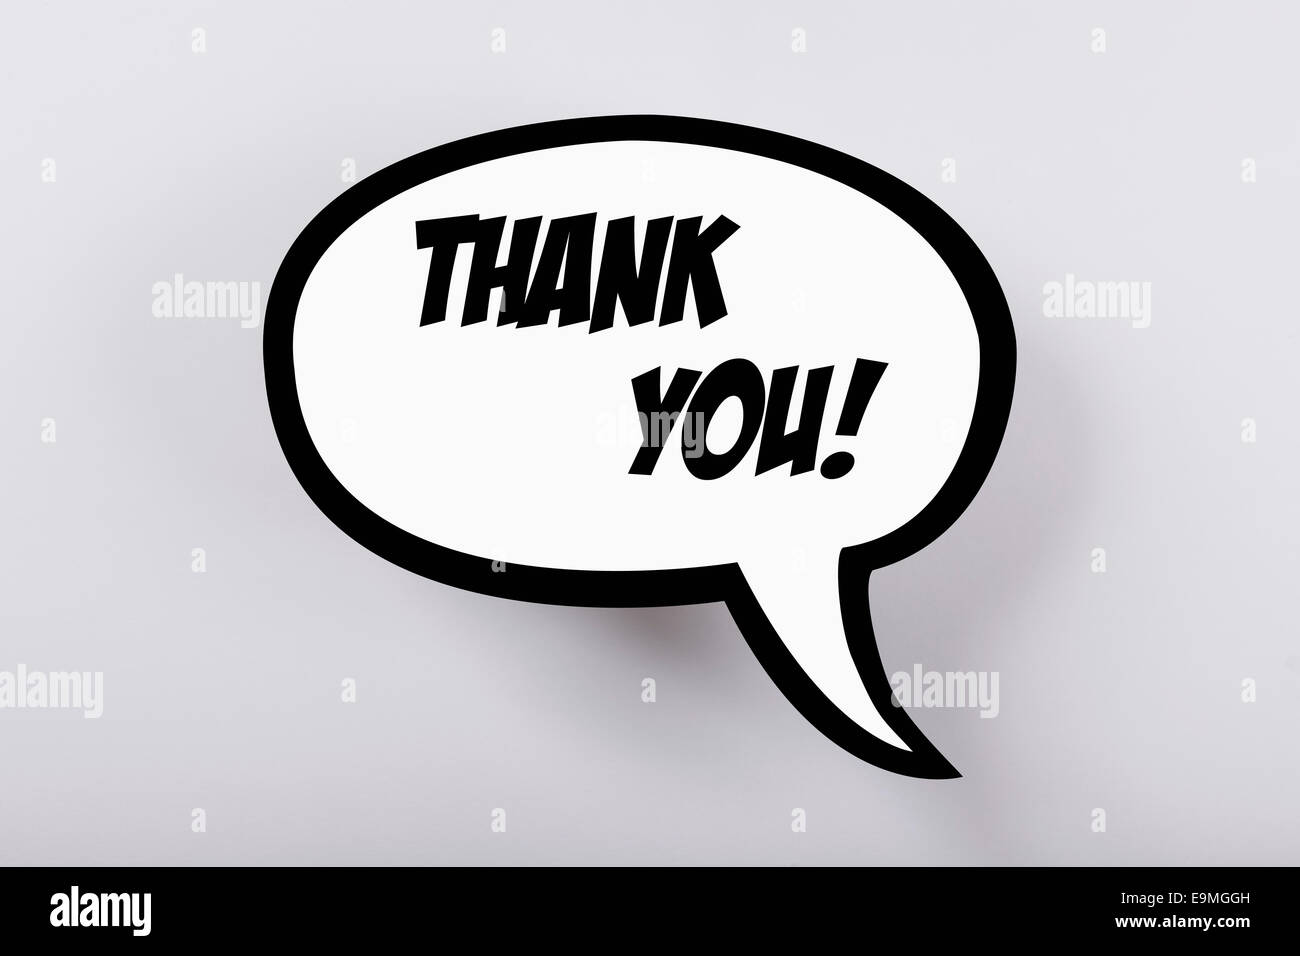 Thank you! speech bubble against gray background Stock Photo